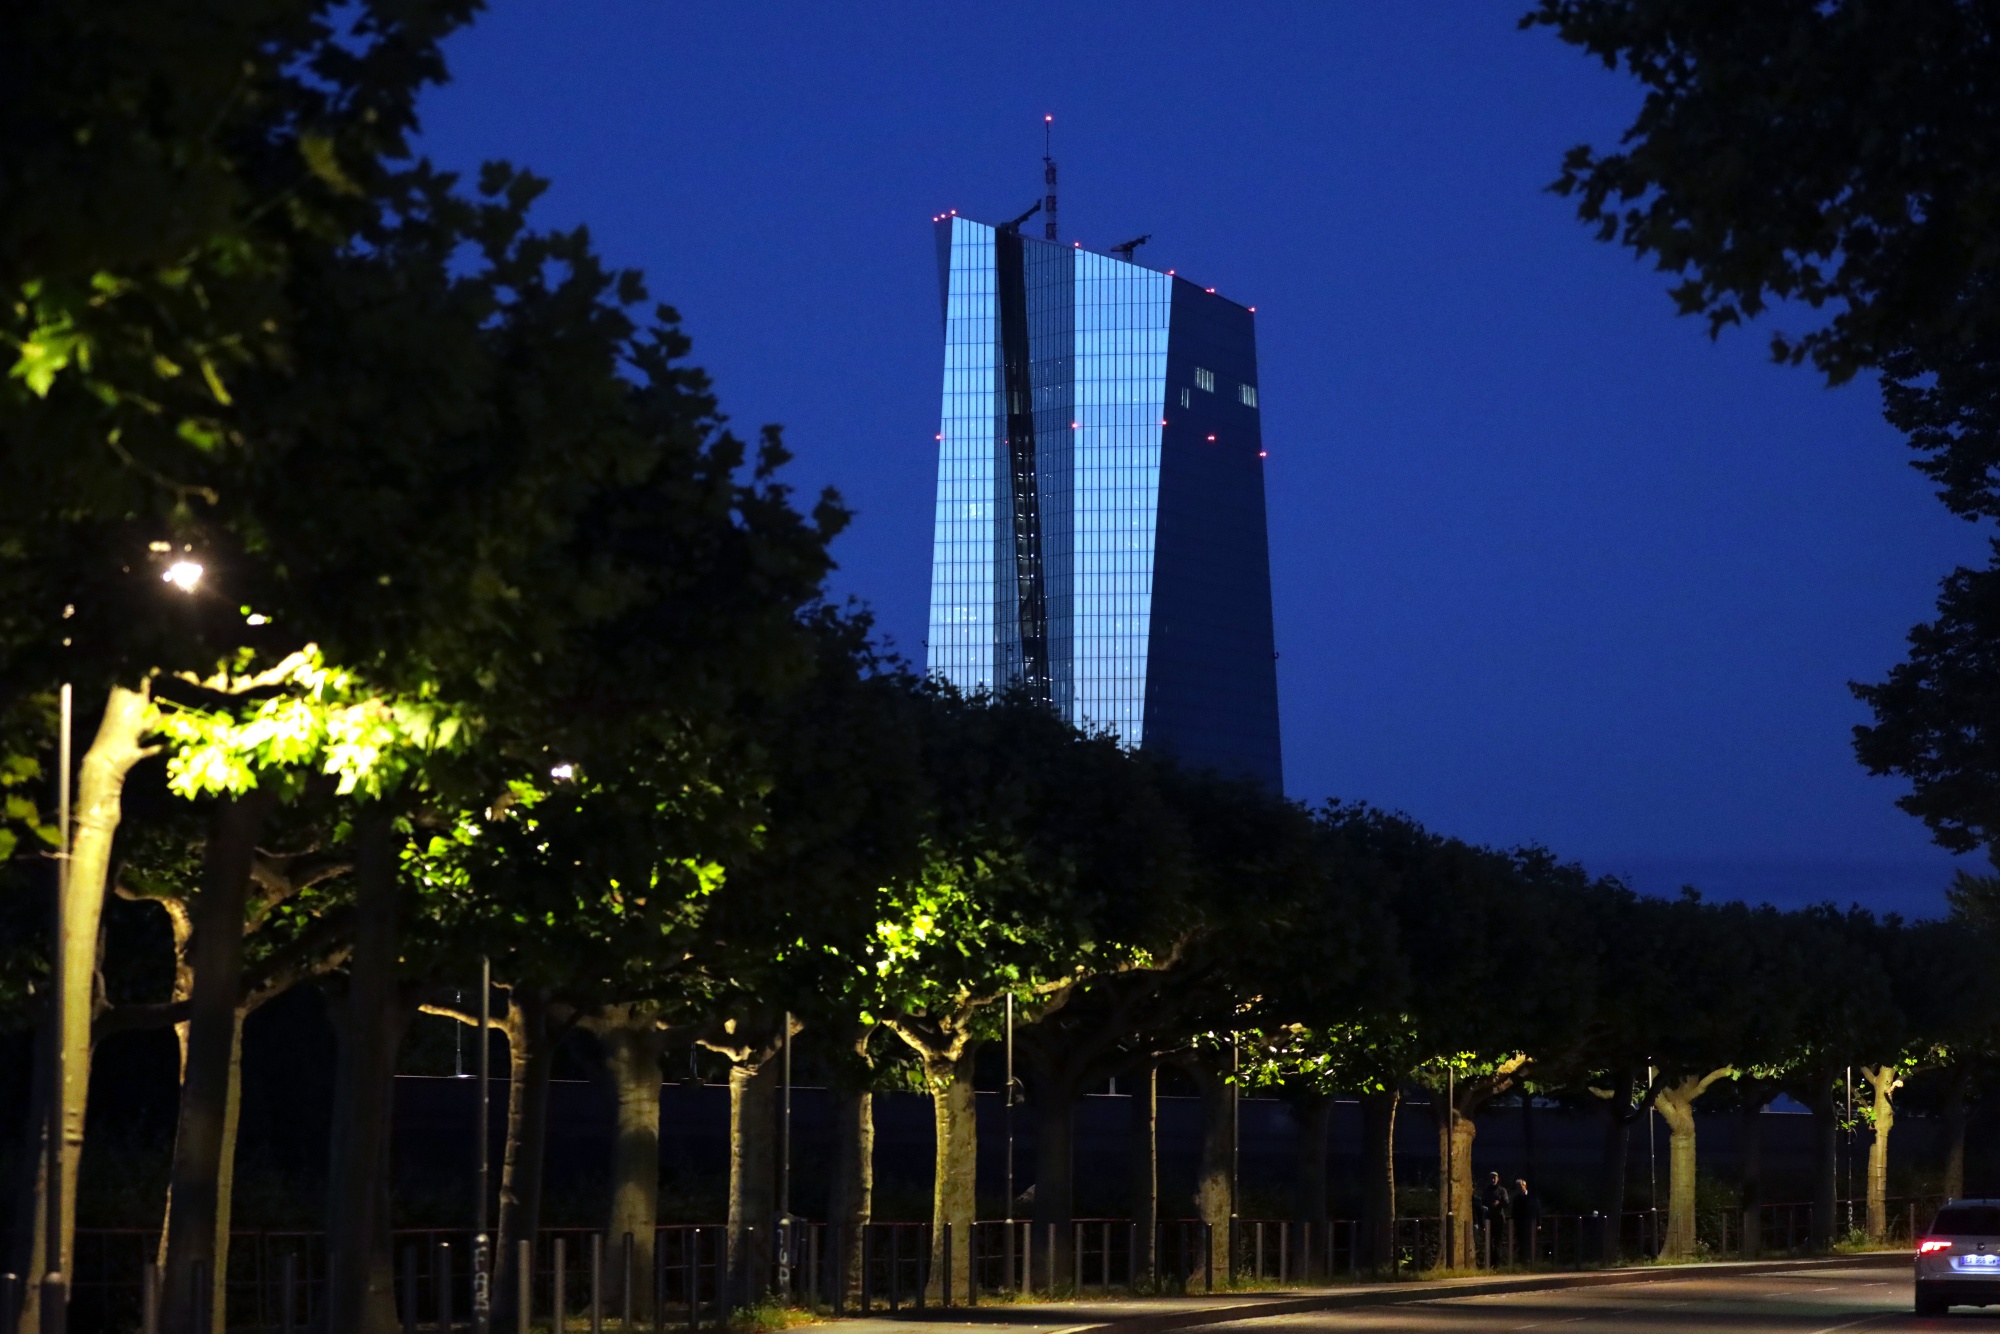 The European Central Bank headquarters in Frankfurt, Germany,.